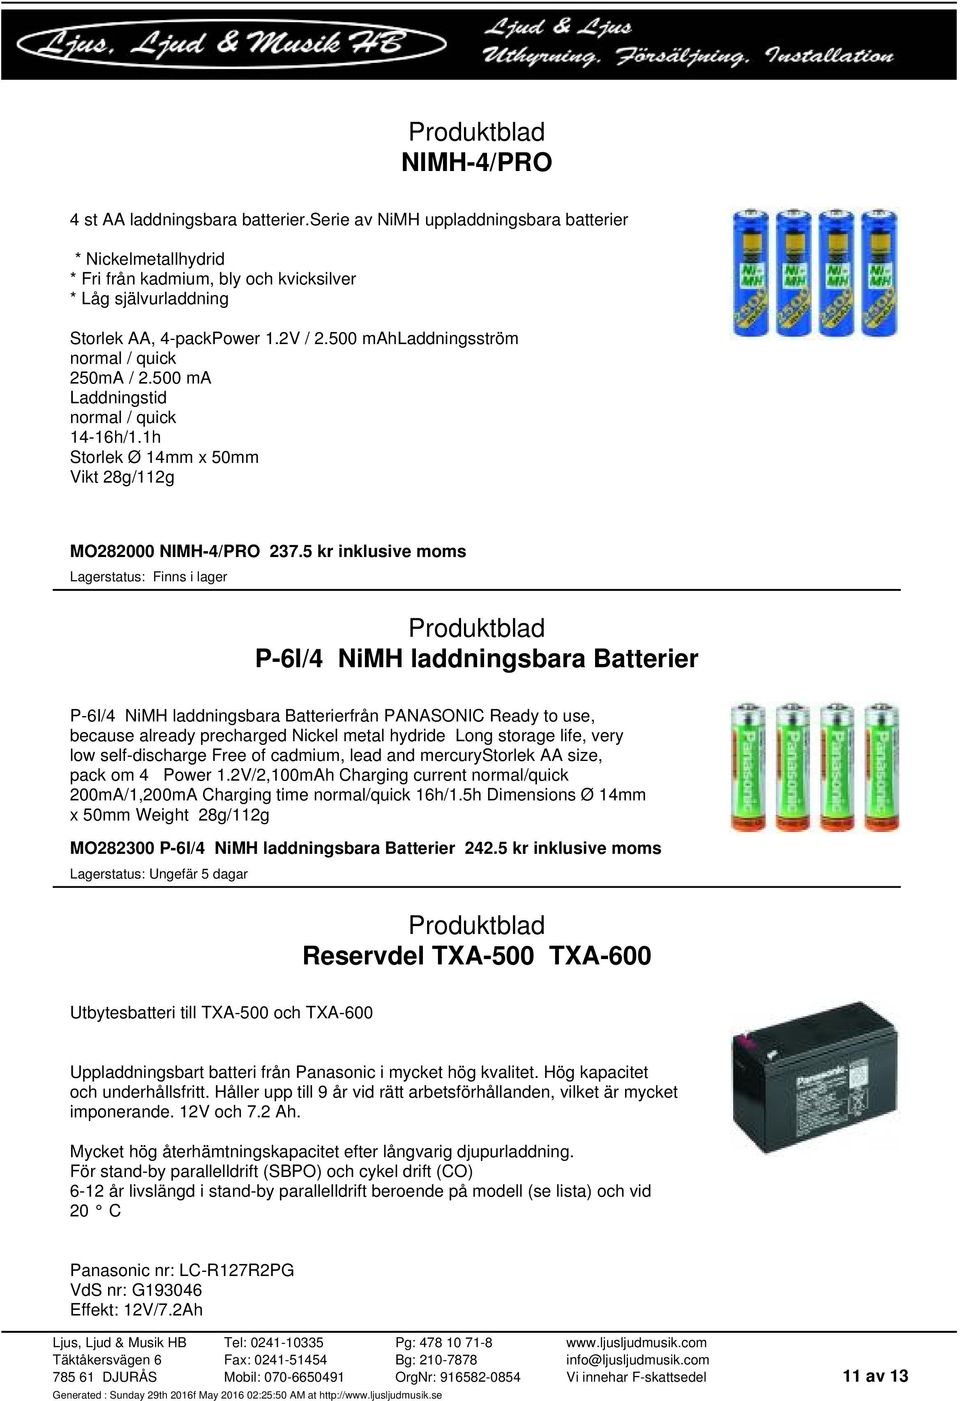 5 kr inklusive moms P-6I/4 NiMH laddningsbara Batterier P-6I/4 NiMH laddningsbara Batterierfrån PANASONIC Ready to use, because already precharged Nickel metal hydride Long storage life, very low